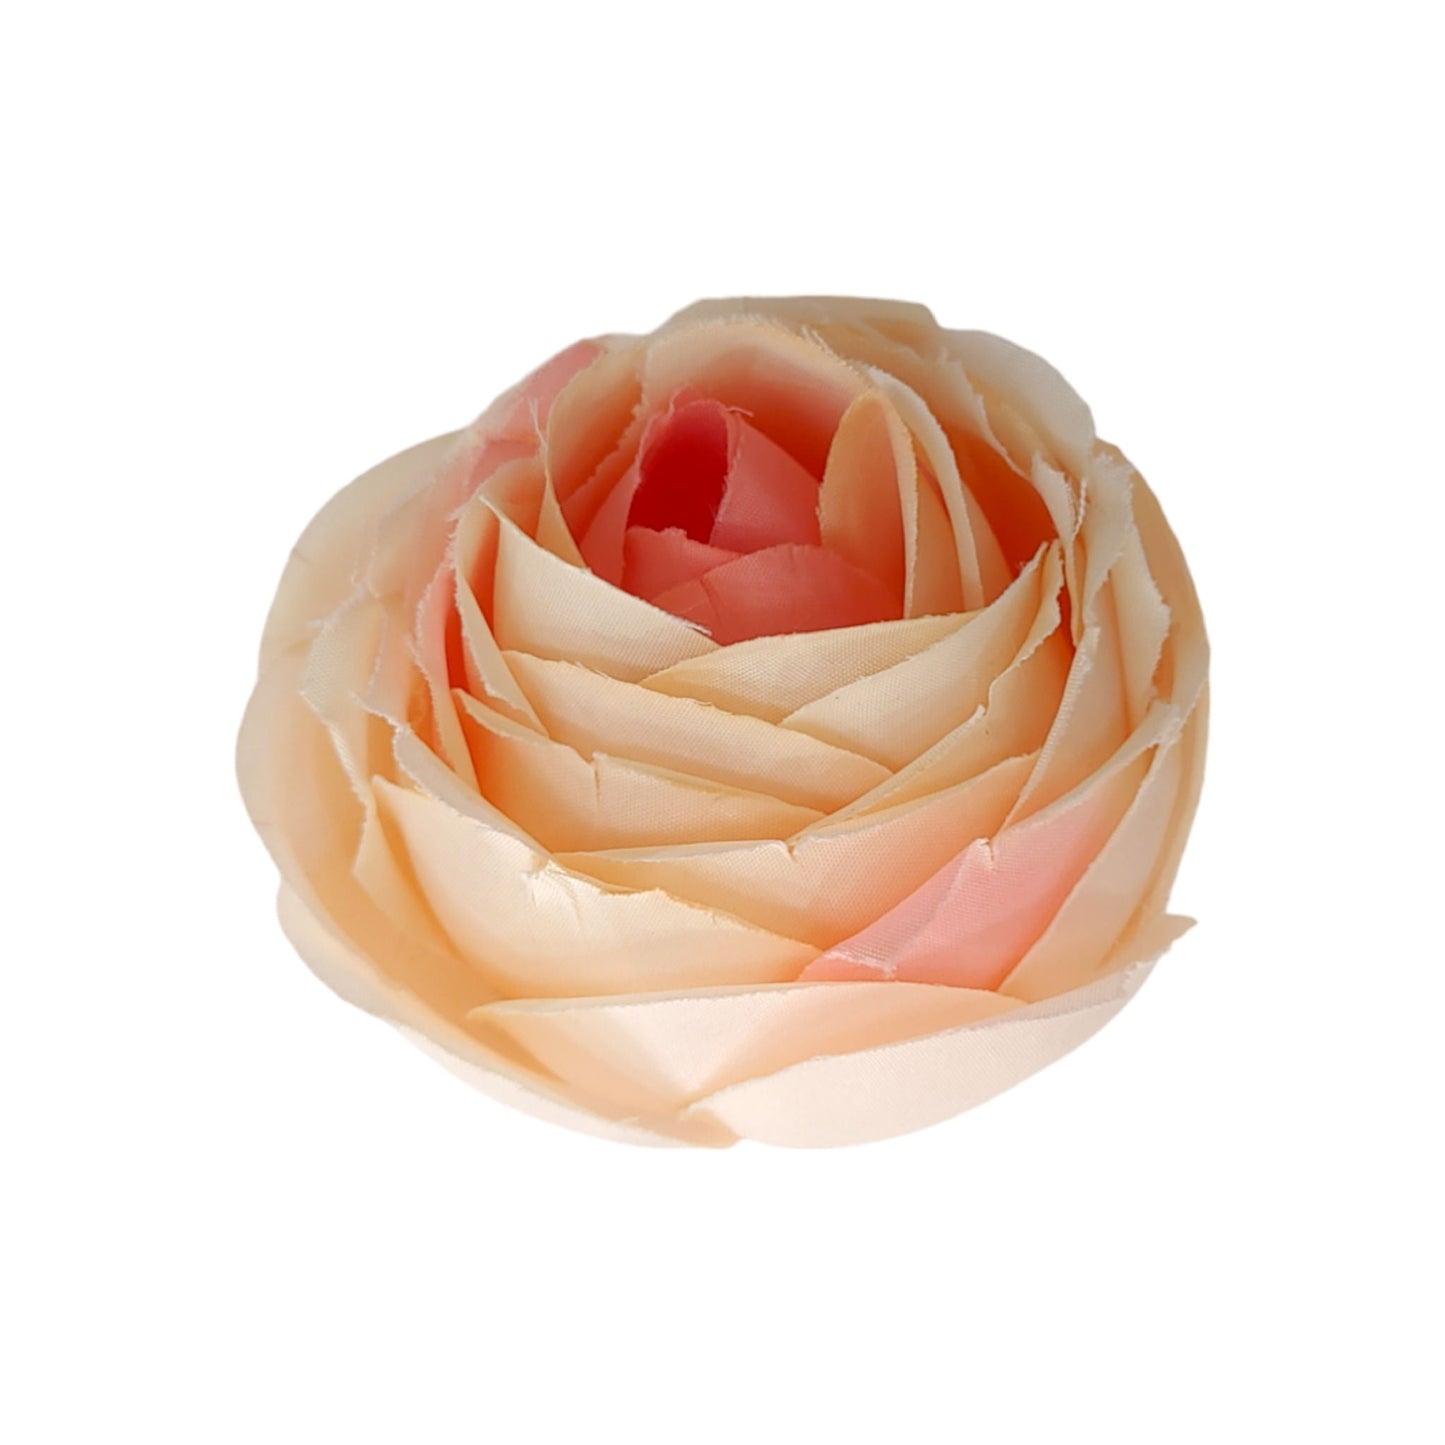 Indian Petals 6.5 cm Big Cabbage  Rose Fabric Flower Head For Crafting or Decoration - 20 Pcs, Onion Pink